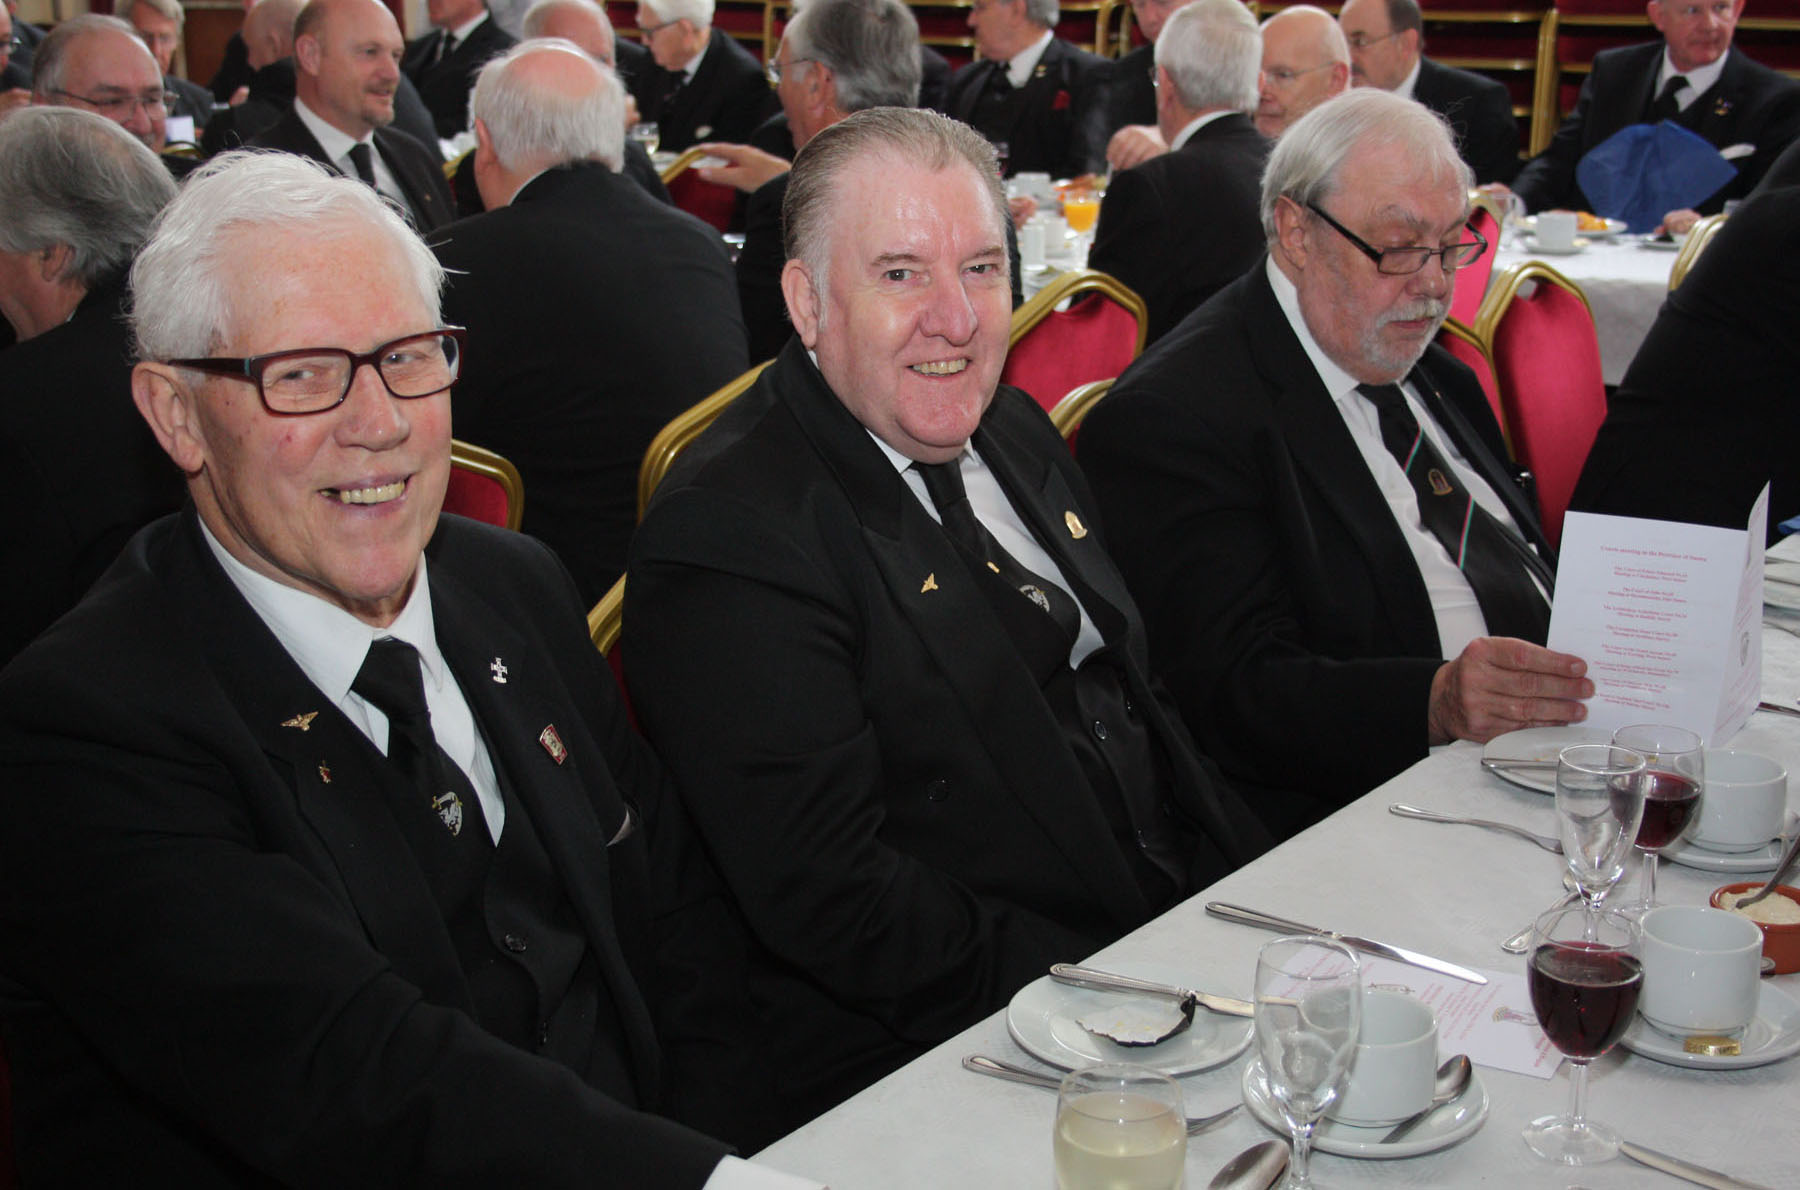 Installation of New Provincial Grand Master and Annual Assembly of Provincial Grand Court